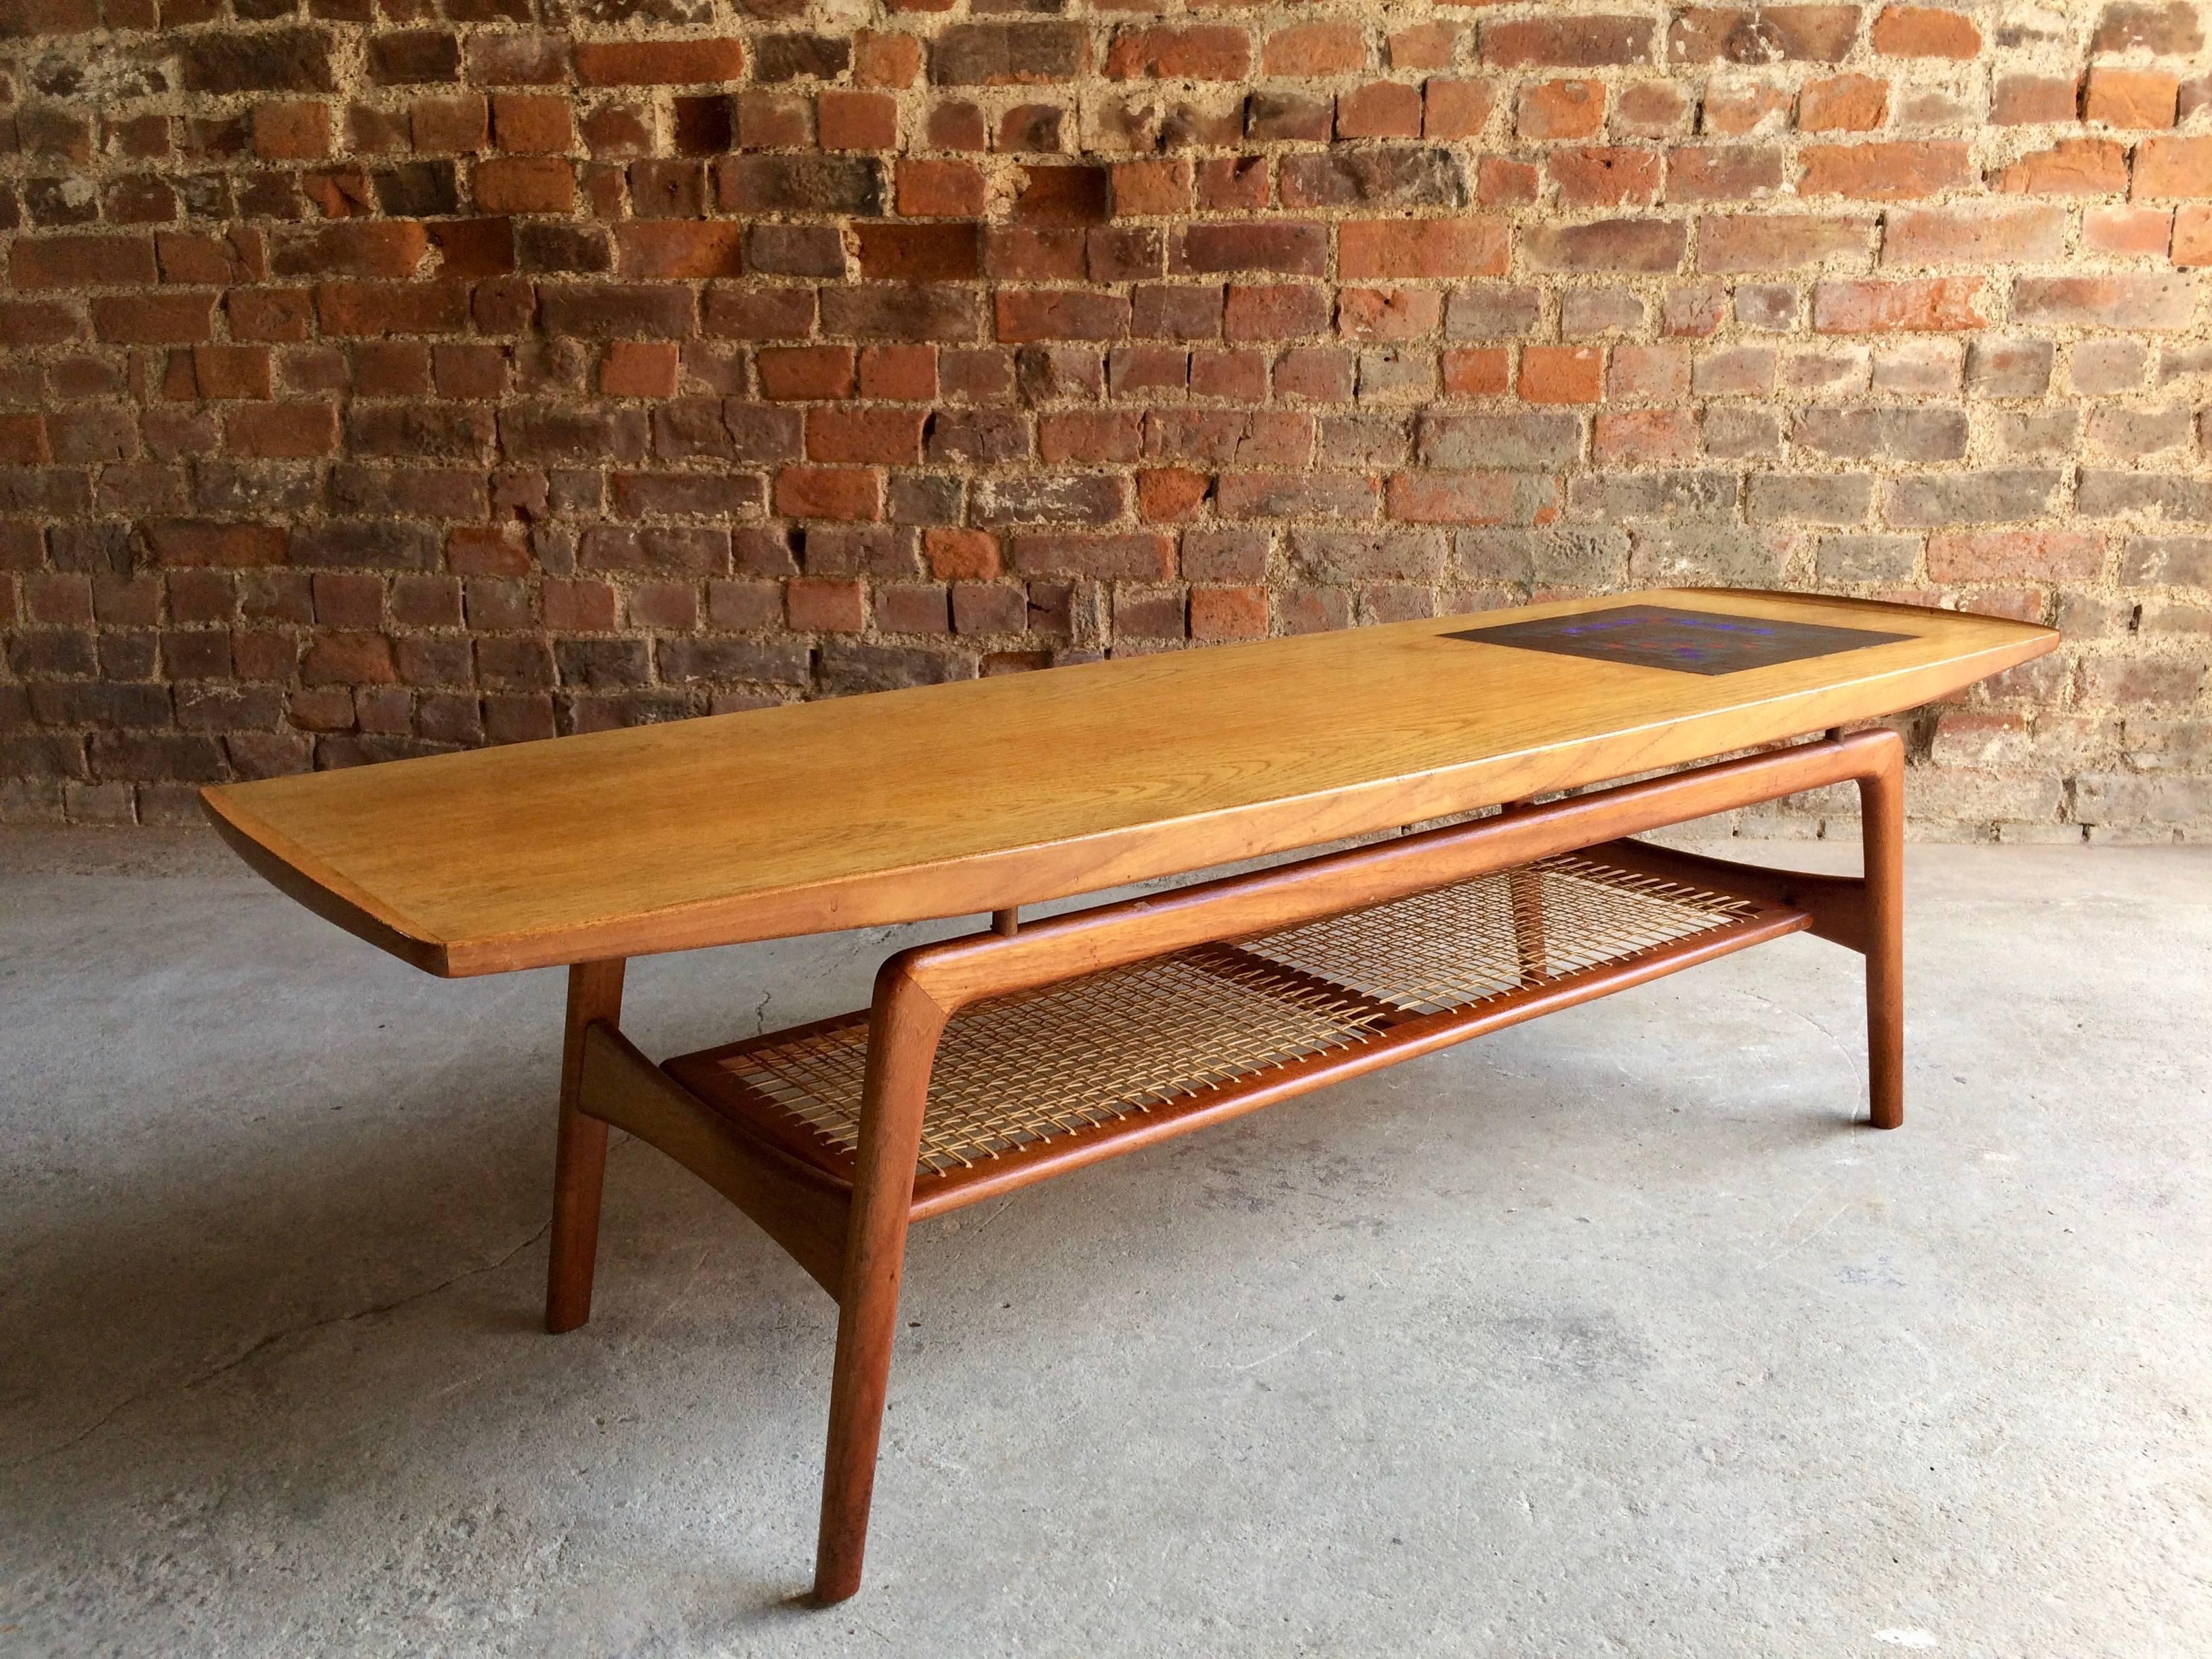 Magnificent original Mid-Century Arne Hovmand-Olsen for Mogens Kold Møbelfabrik, Denmark, teak coffee table with inset mosaic tiles, circa 1950, the table is offered in superb condition with only light wear and looks amazing.

Mid Century